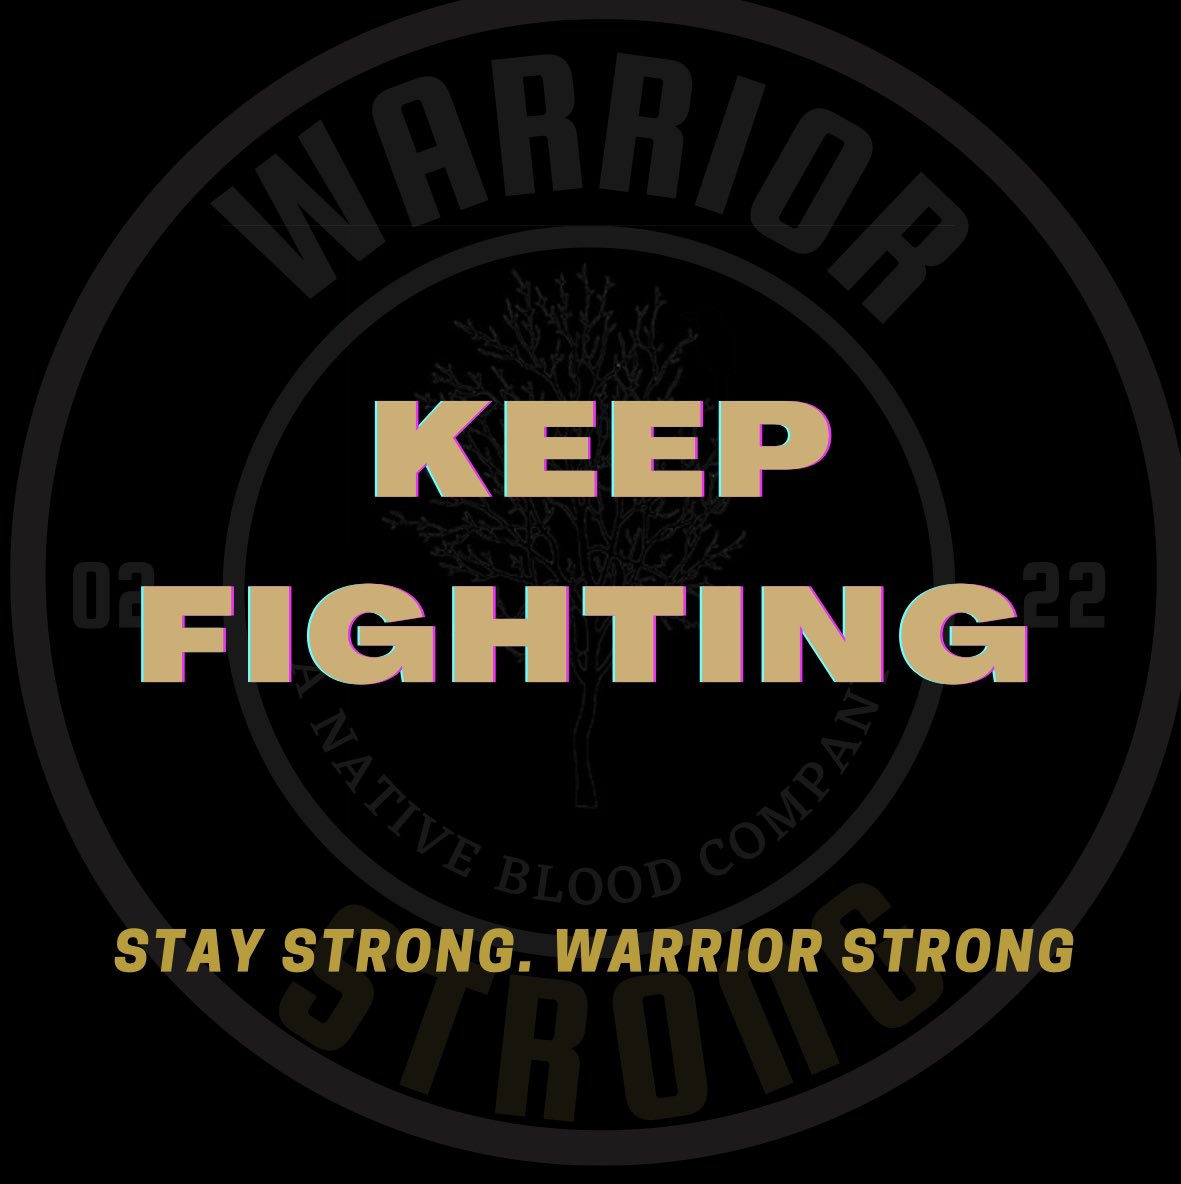 Keep Fighting. 
#warriorstrongco #addiction #mentalhealth #warrior #recovery #redroad #anxiety #physicalhealth #cyclebreaker #native #nativeamerican #sobriety #everychildmatters #residentialschool #mmiw #mmiwawareness #americanindianmovement #cyclebreaker #racism #firstnation